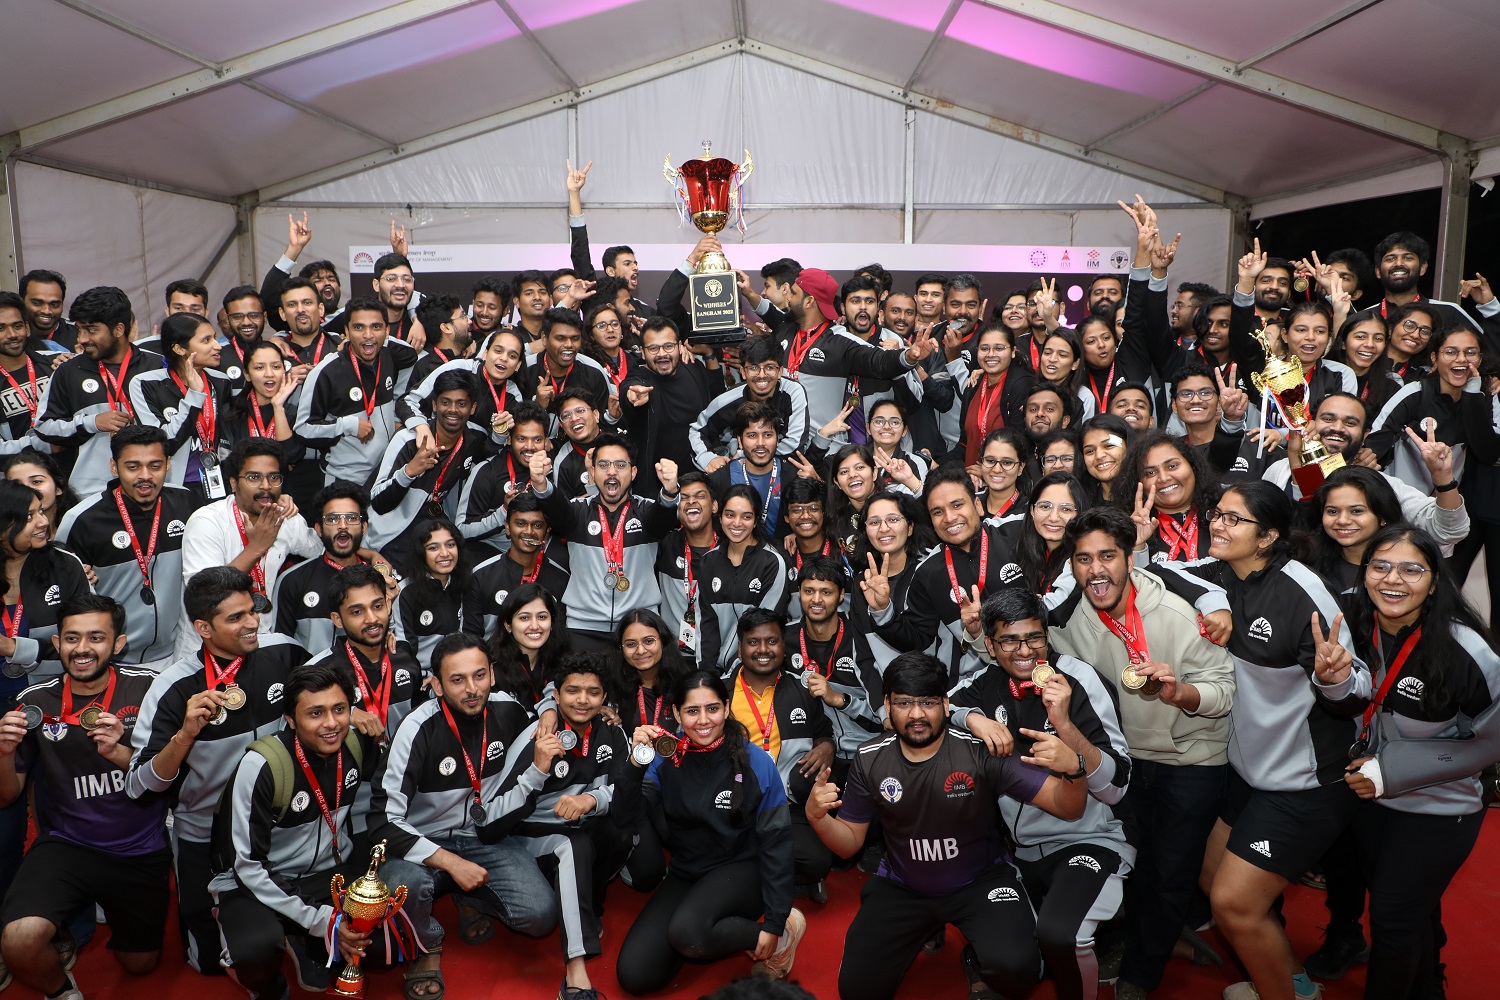 IIM Bangalore participants with the Championship Trophy of Sangram 2022.